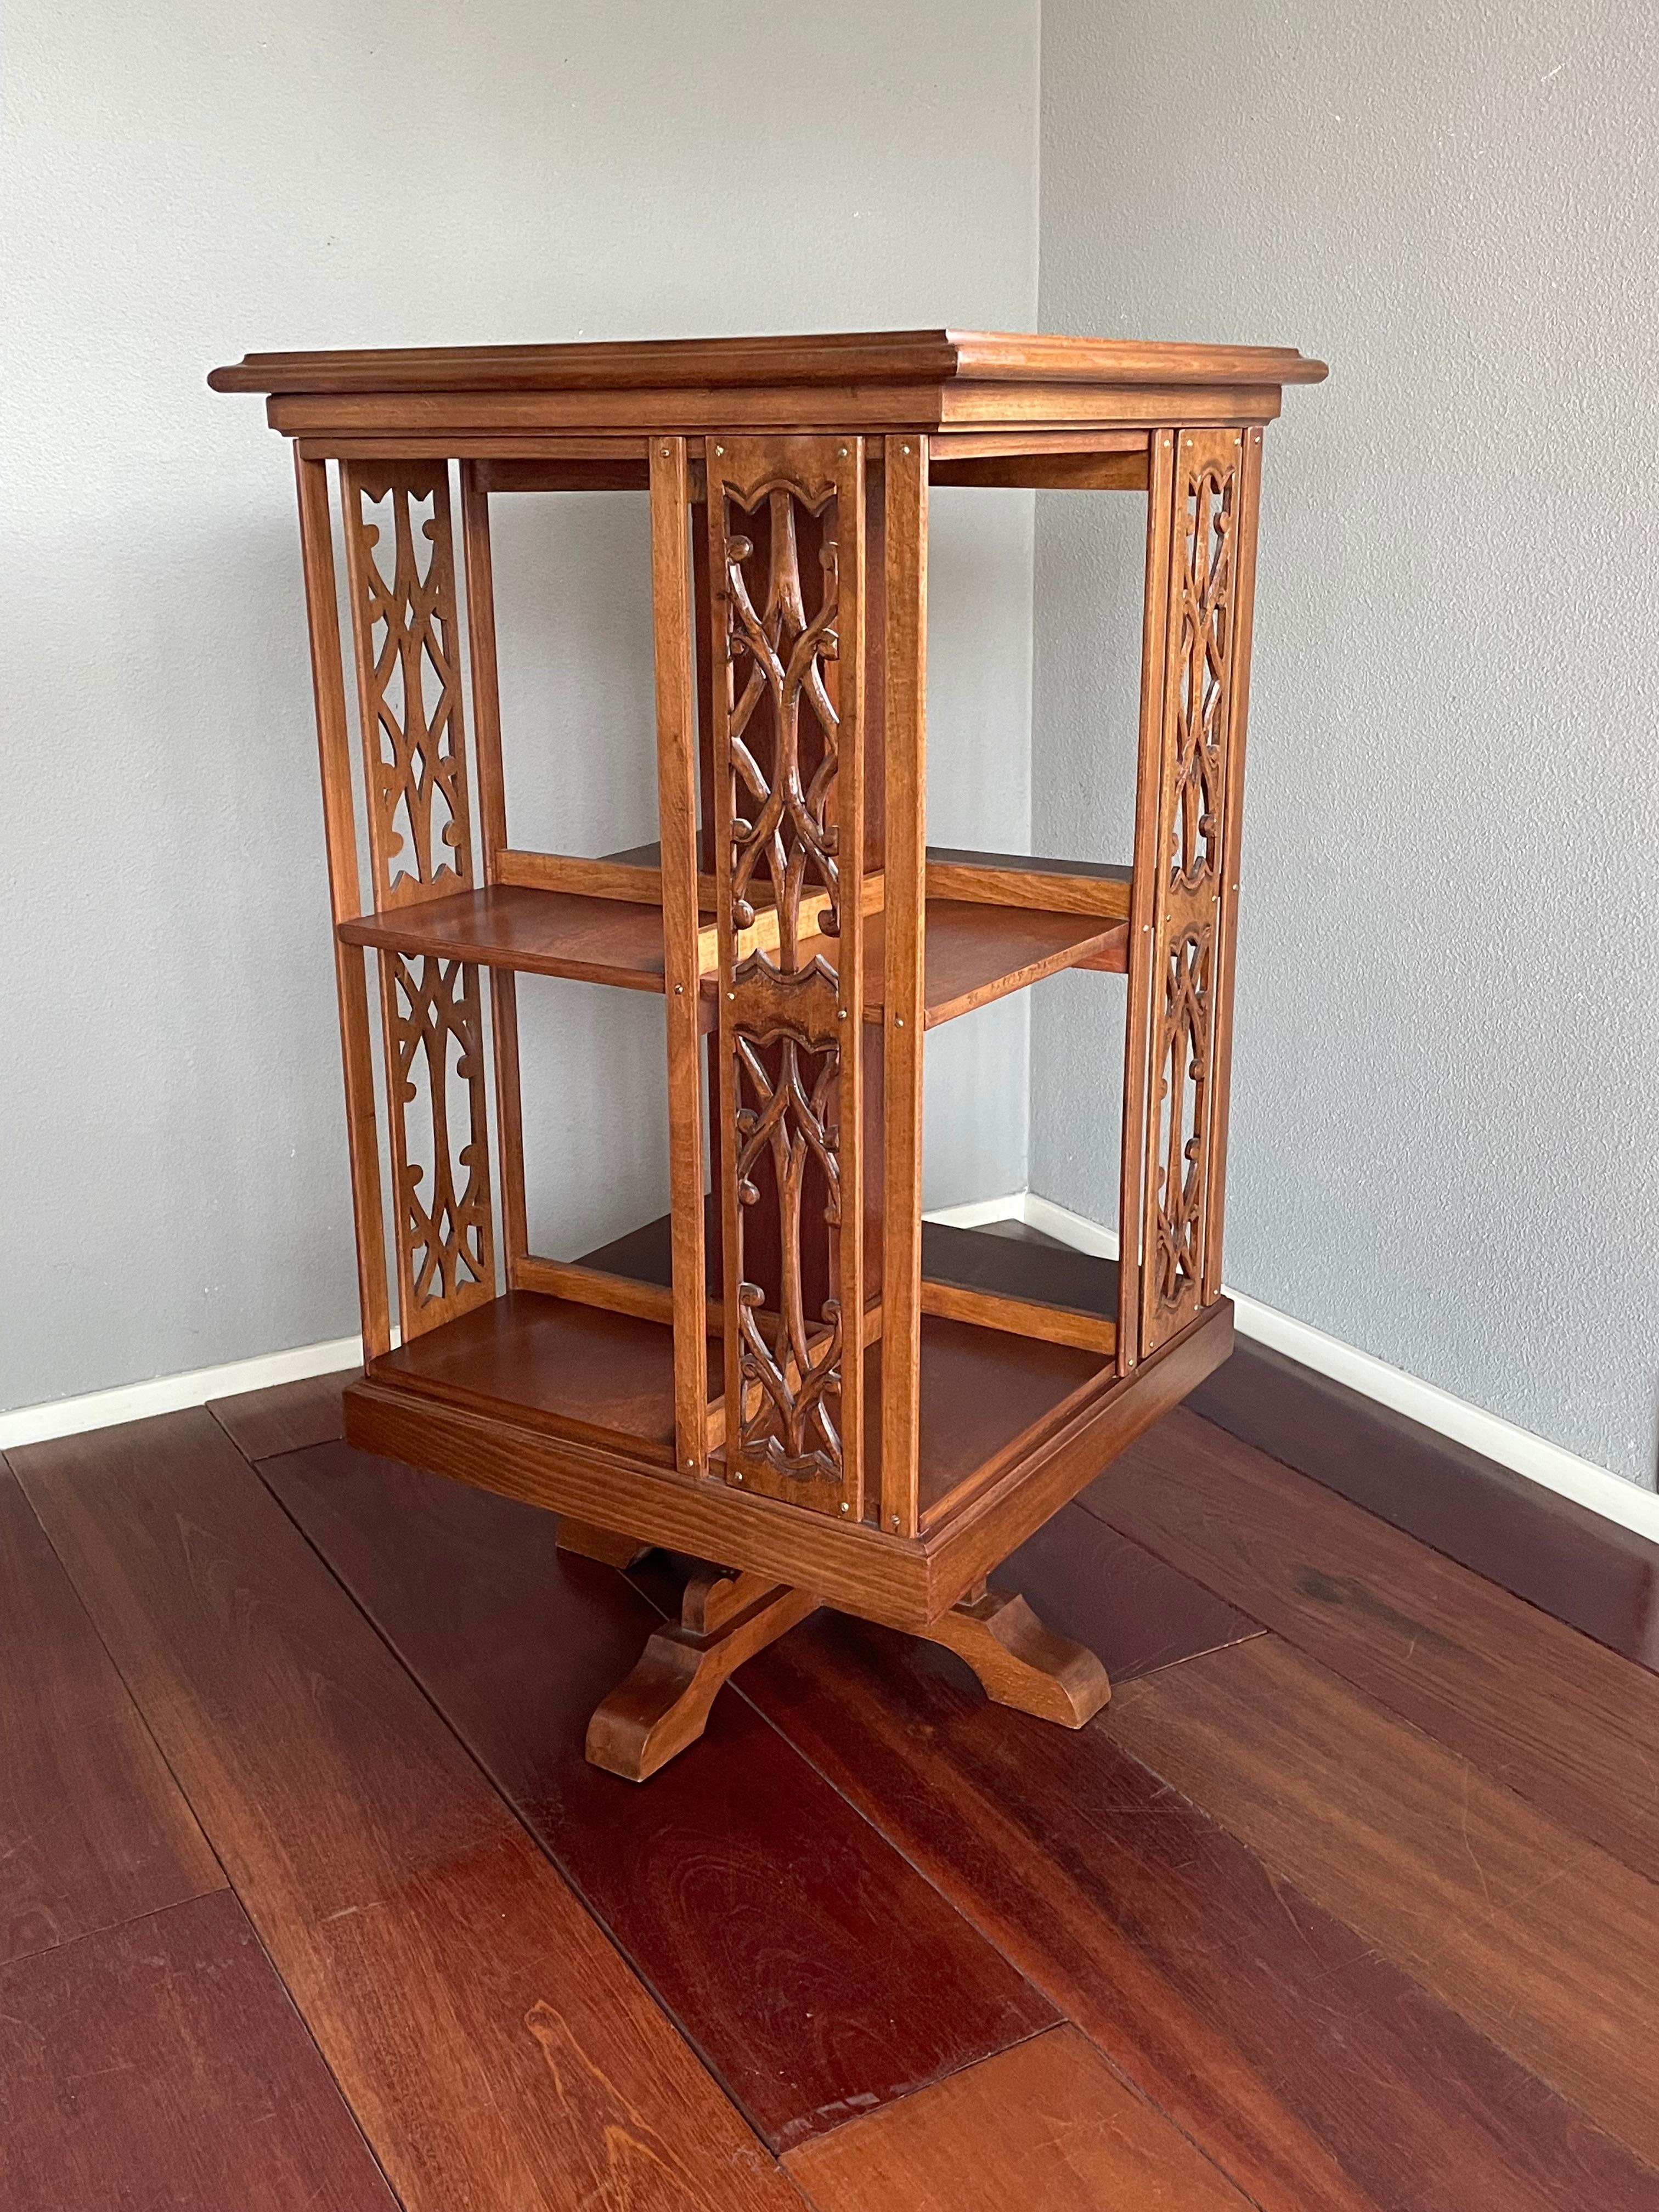 Great looking Arts & Crafts style bookcase.

This Arts & Crafts design revolving bookcase rotates perfectly and it is in superb condition. We found this rare specimen in a home with a wonderfully eclectic interior and this was one of the rare items